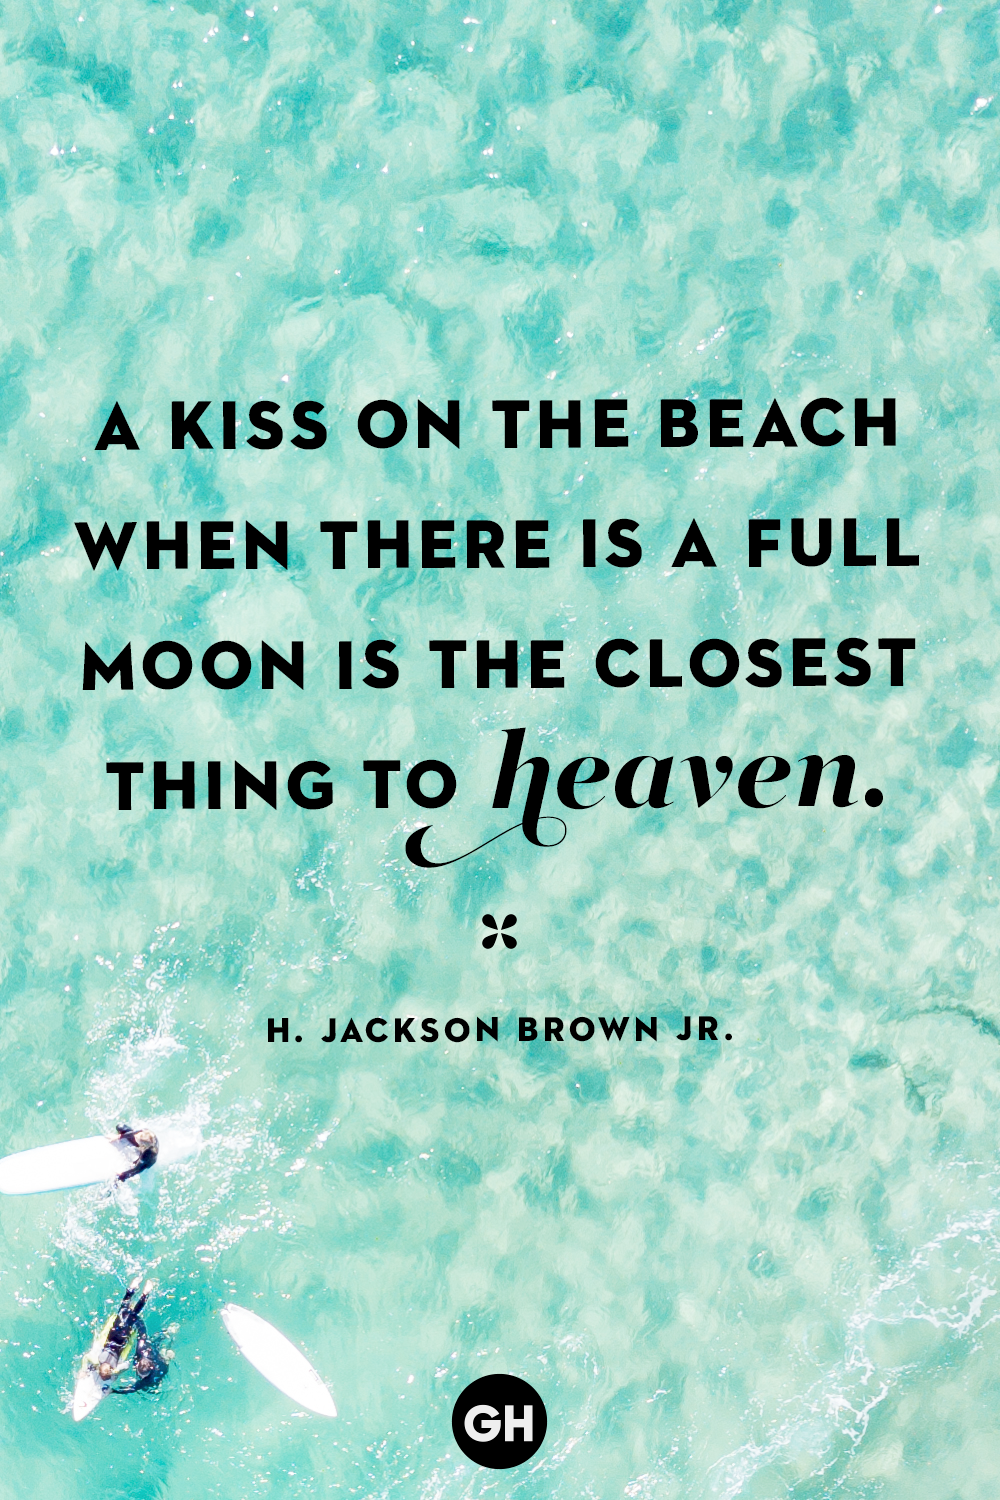 40 Best Beach Quotes Sayings And Quotes About The Beach